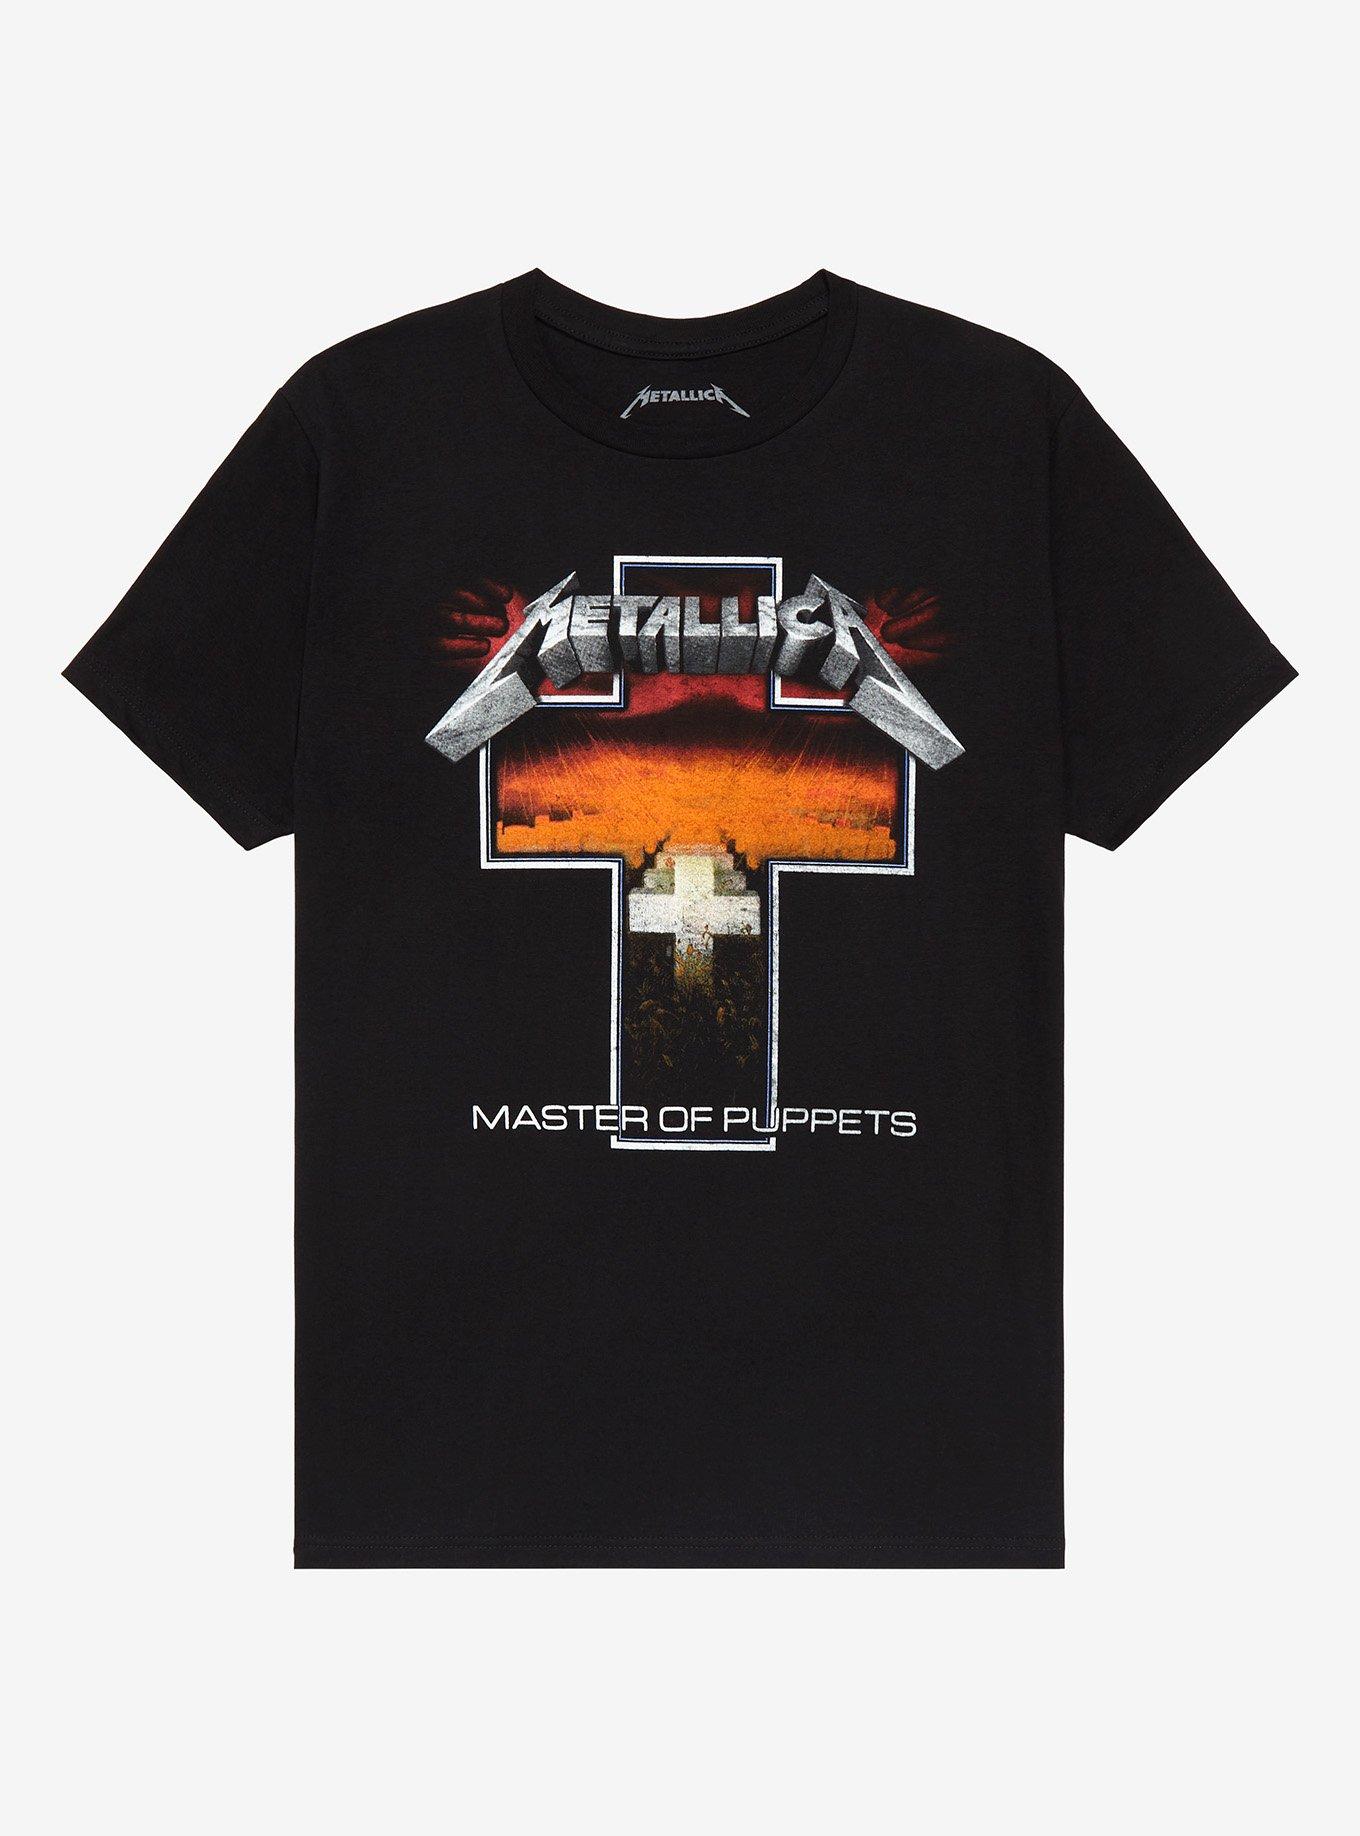 Metallica - Master of Puppets Band - 14 x 11 Printed Back Patch